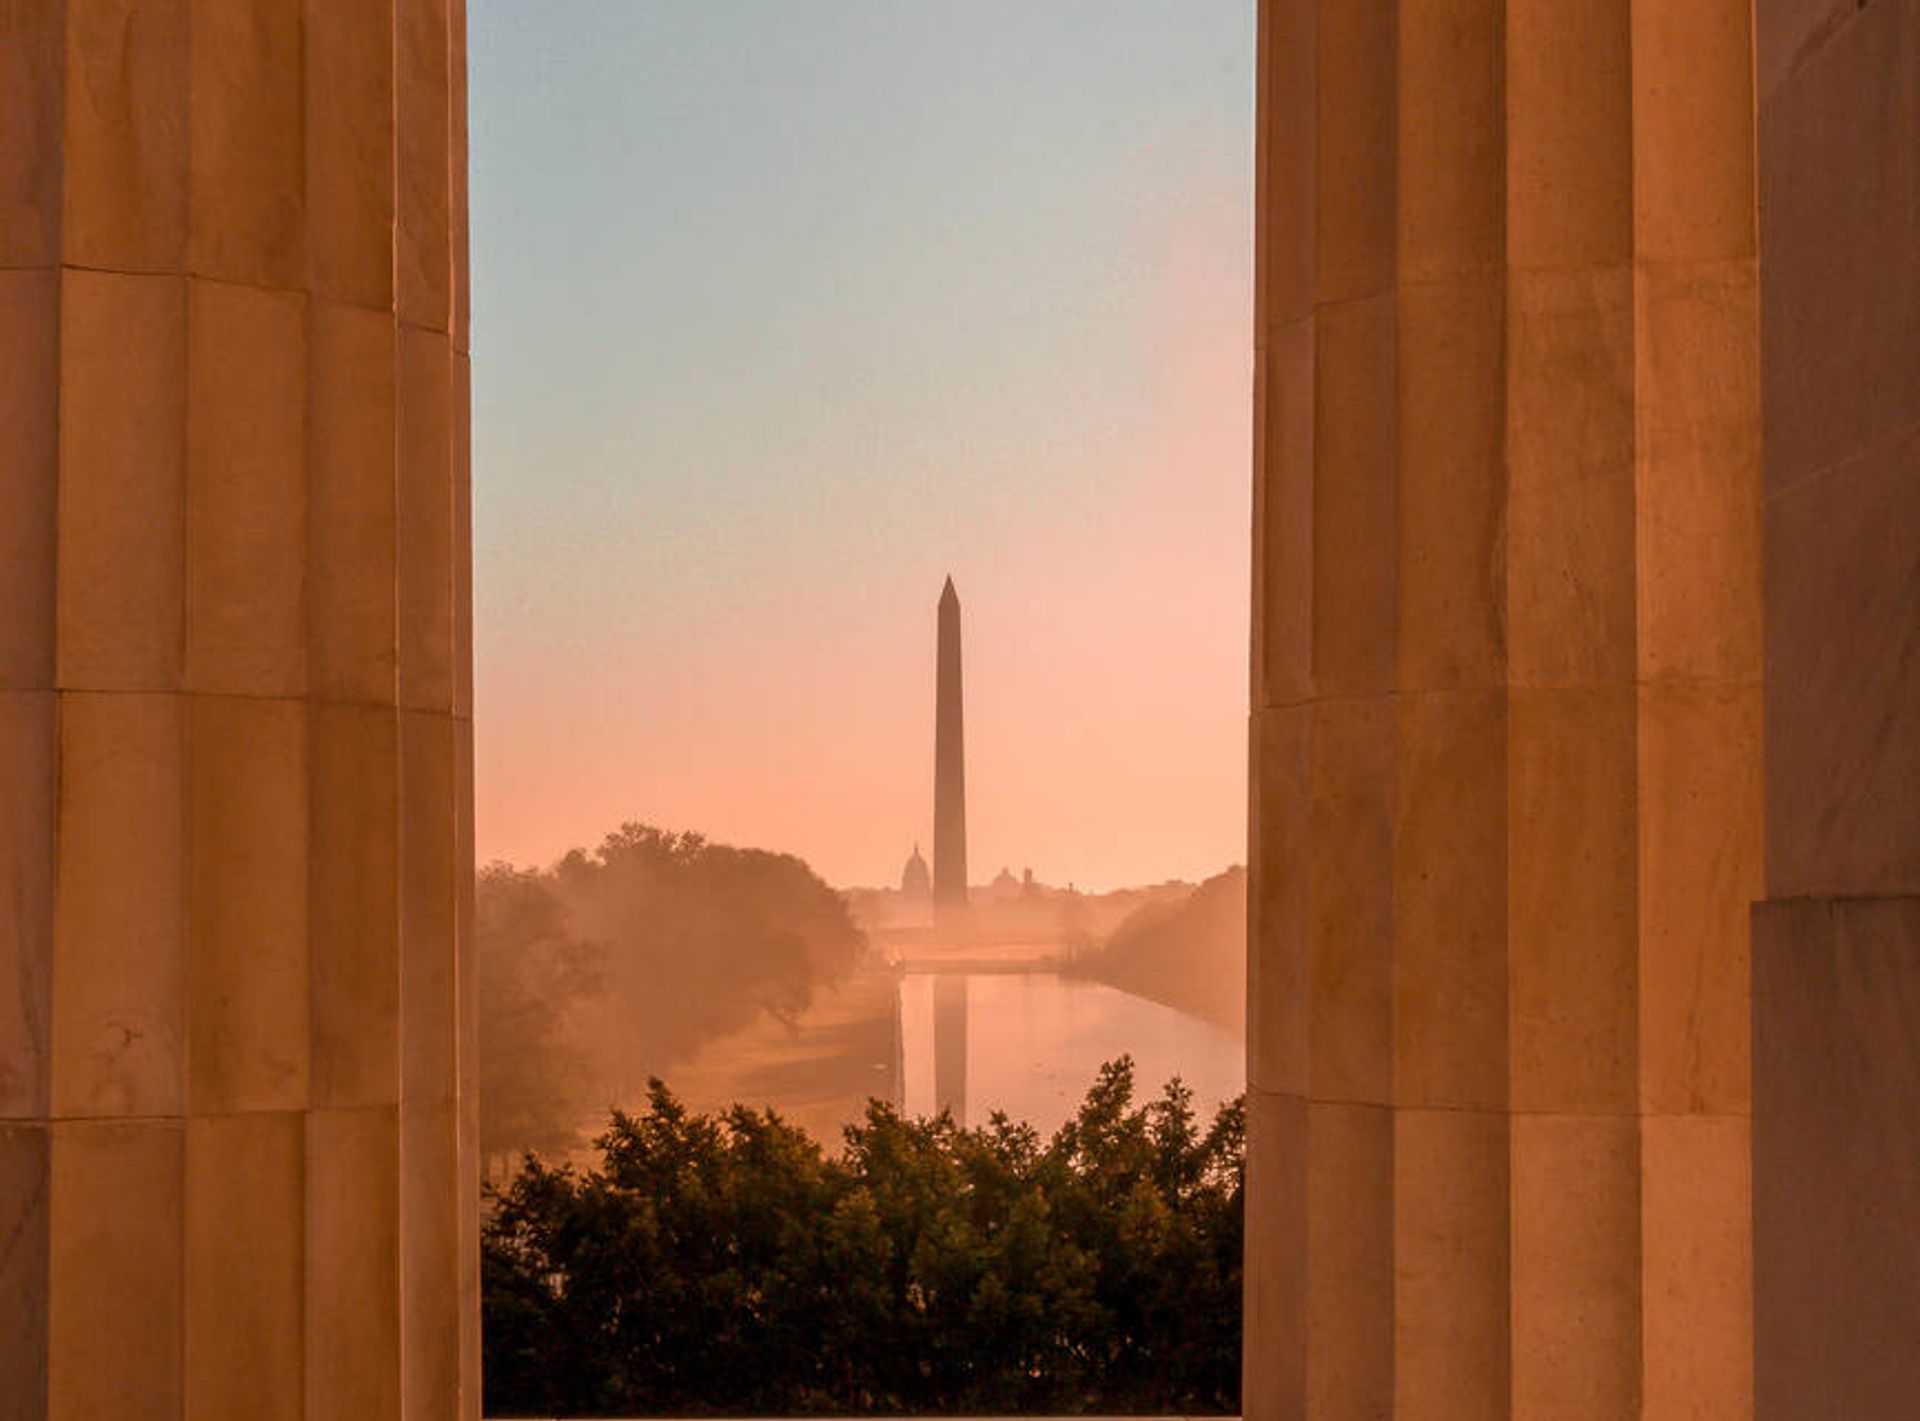 Start your day at the city’s Lincoln Memorial Reflecting Pool Photo: Steve Tulley/Alamy Stock Photo